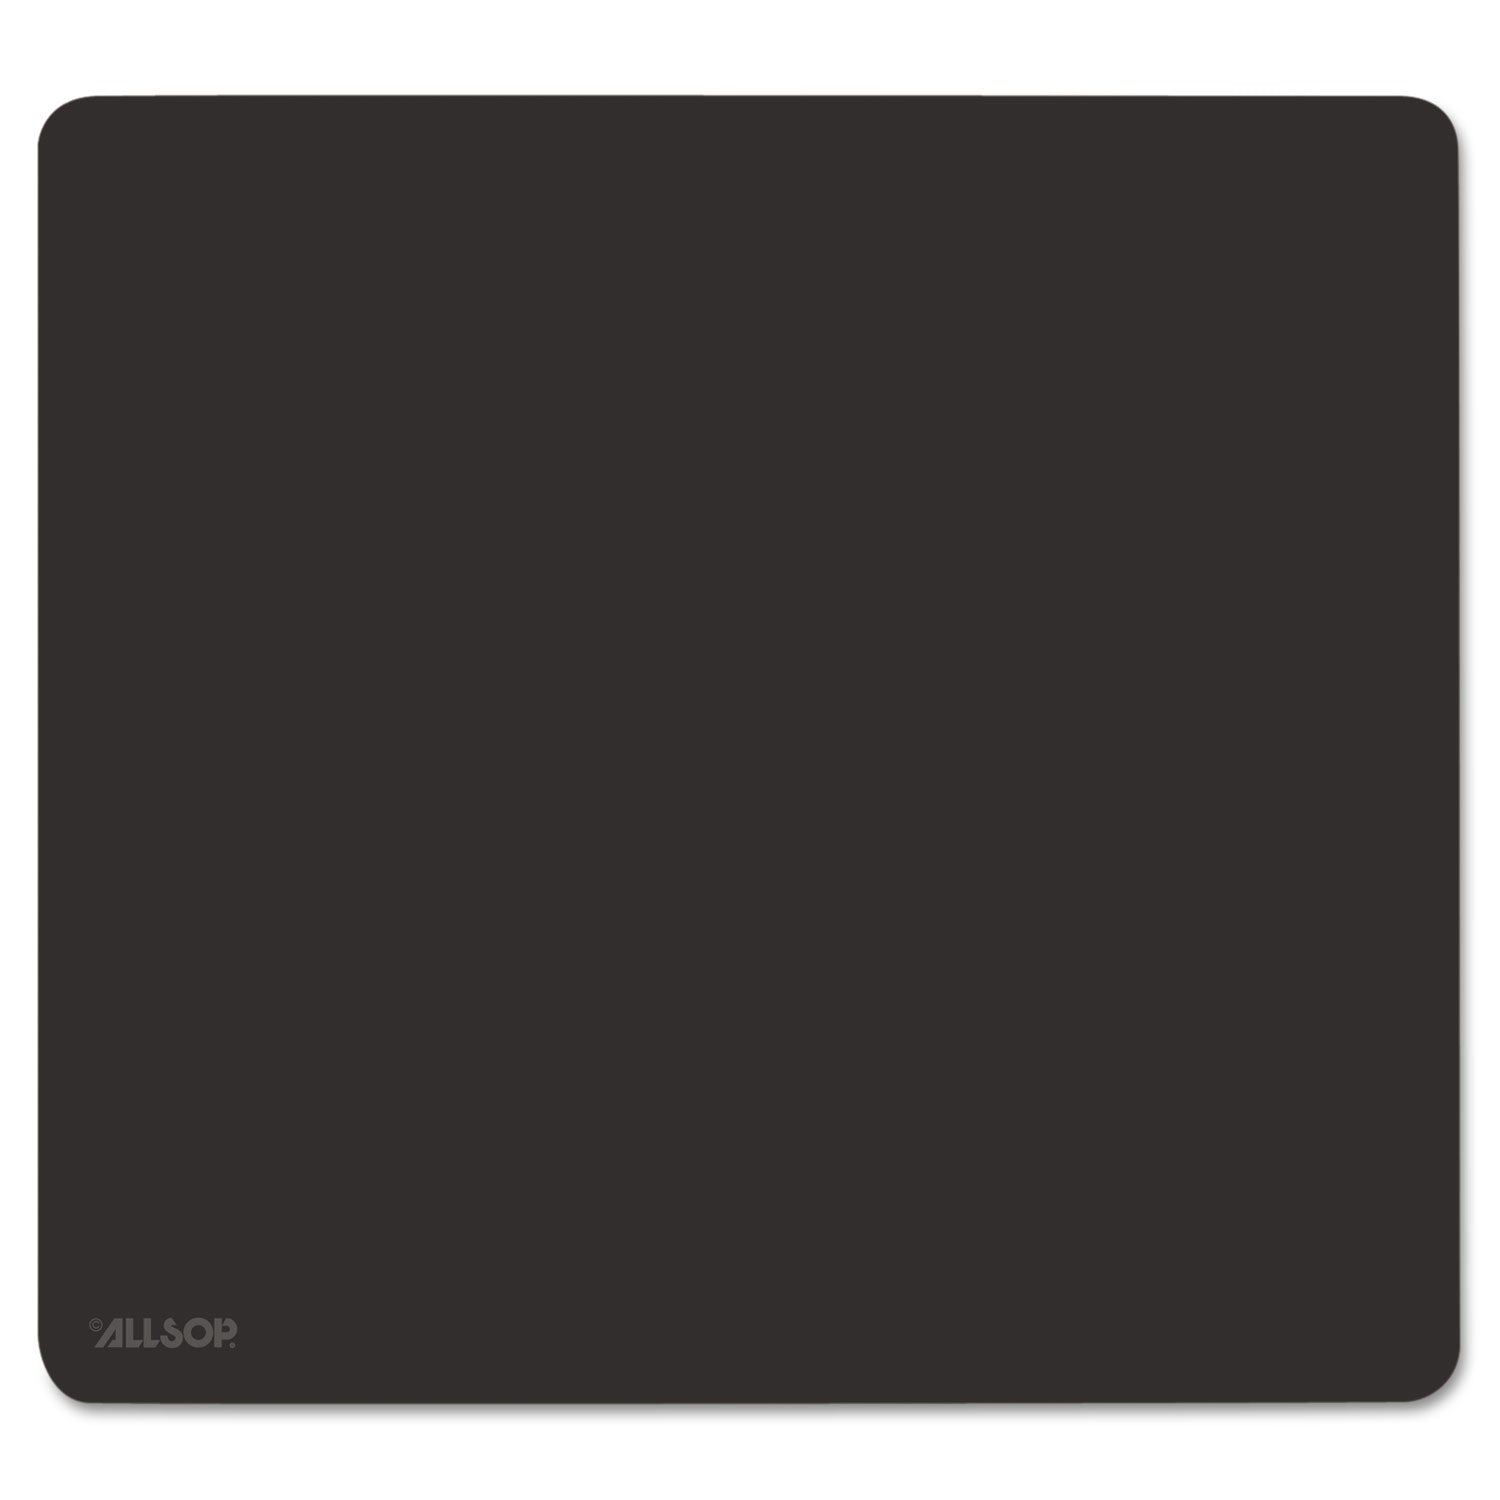 Accutrack Slimline Mouse Pad, X-Large, 11.5 x 12.5, Graphite - 